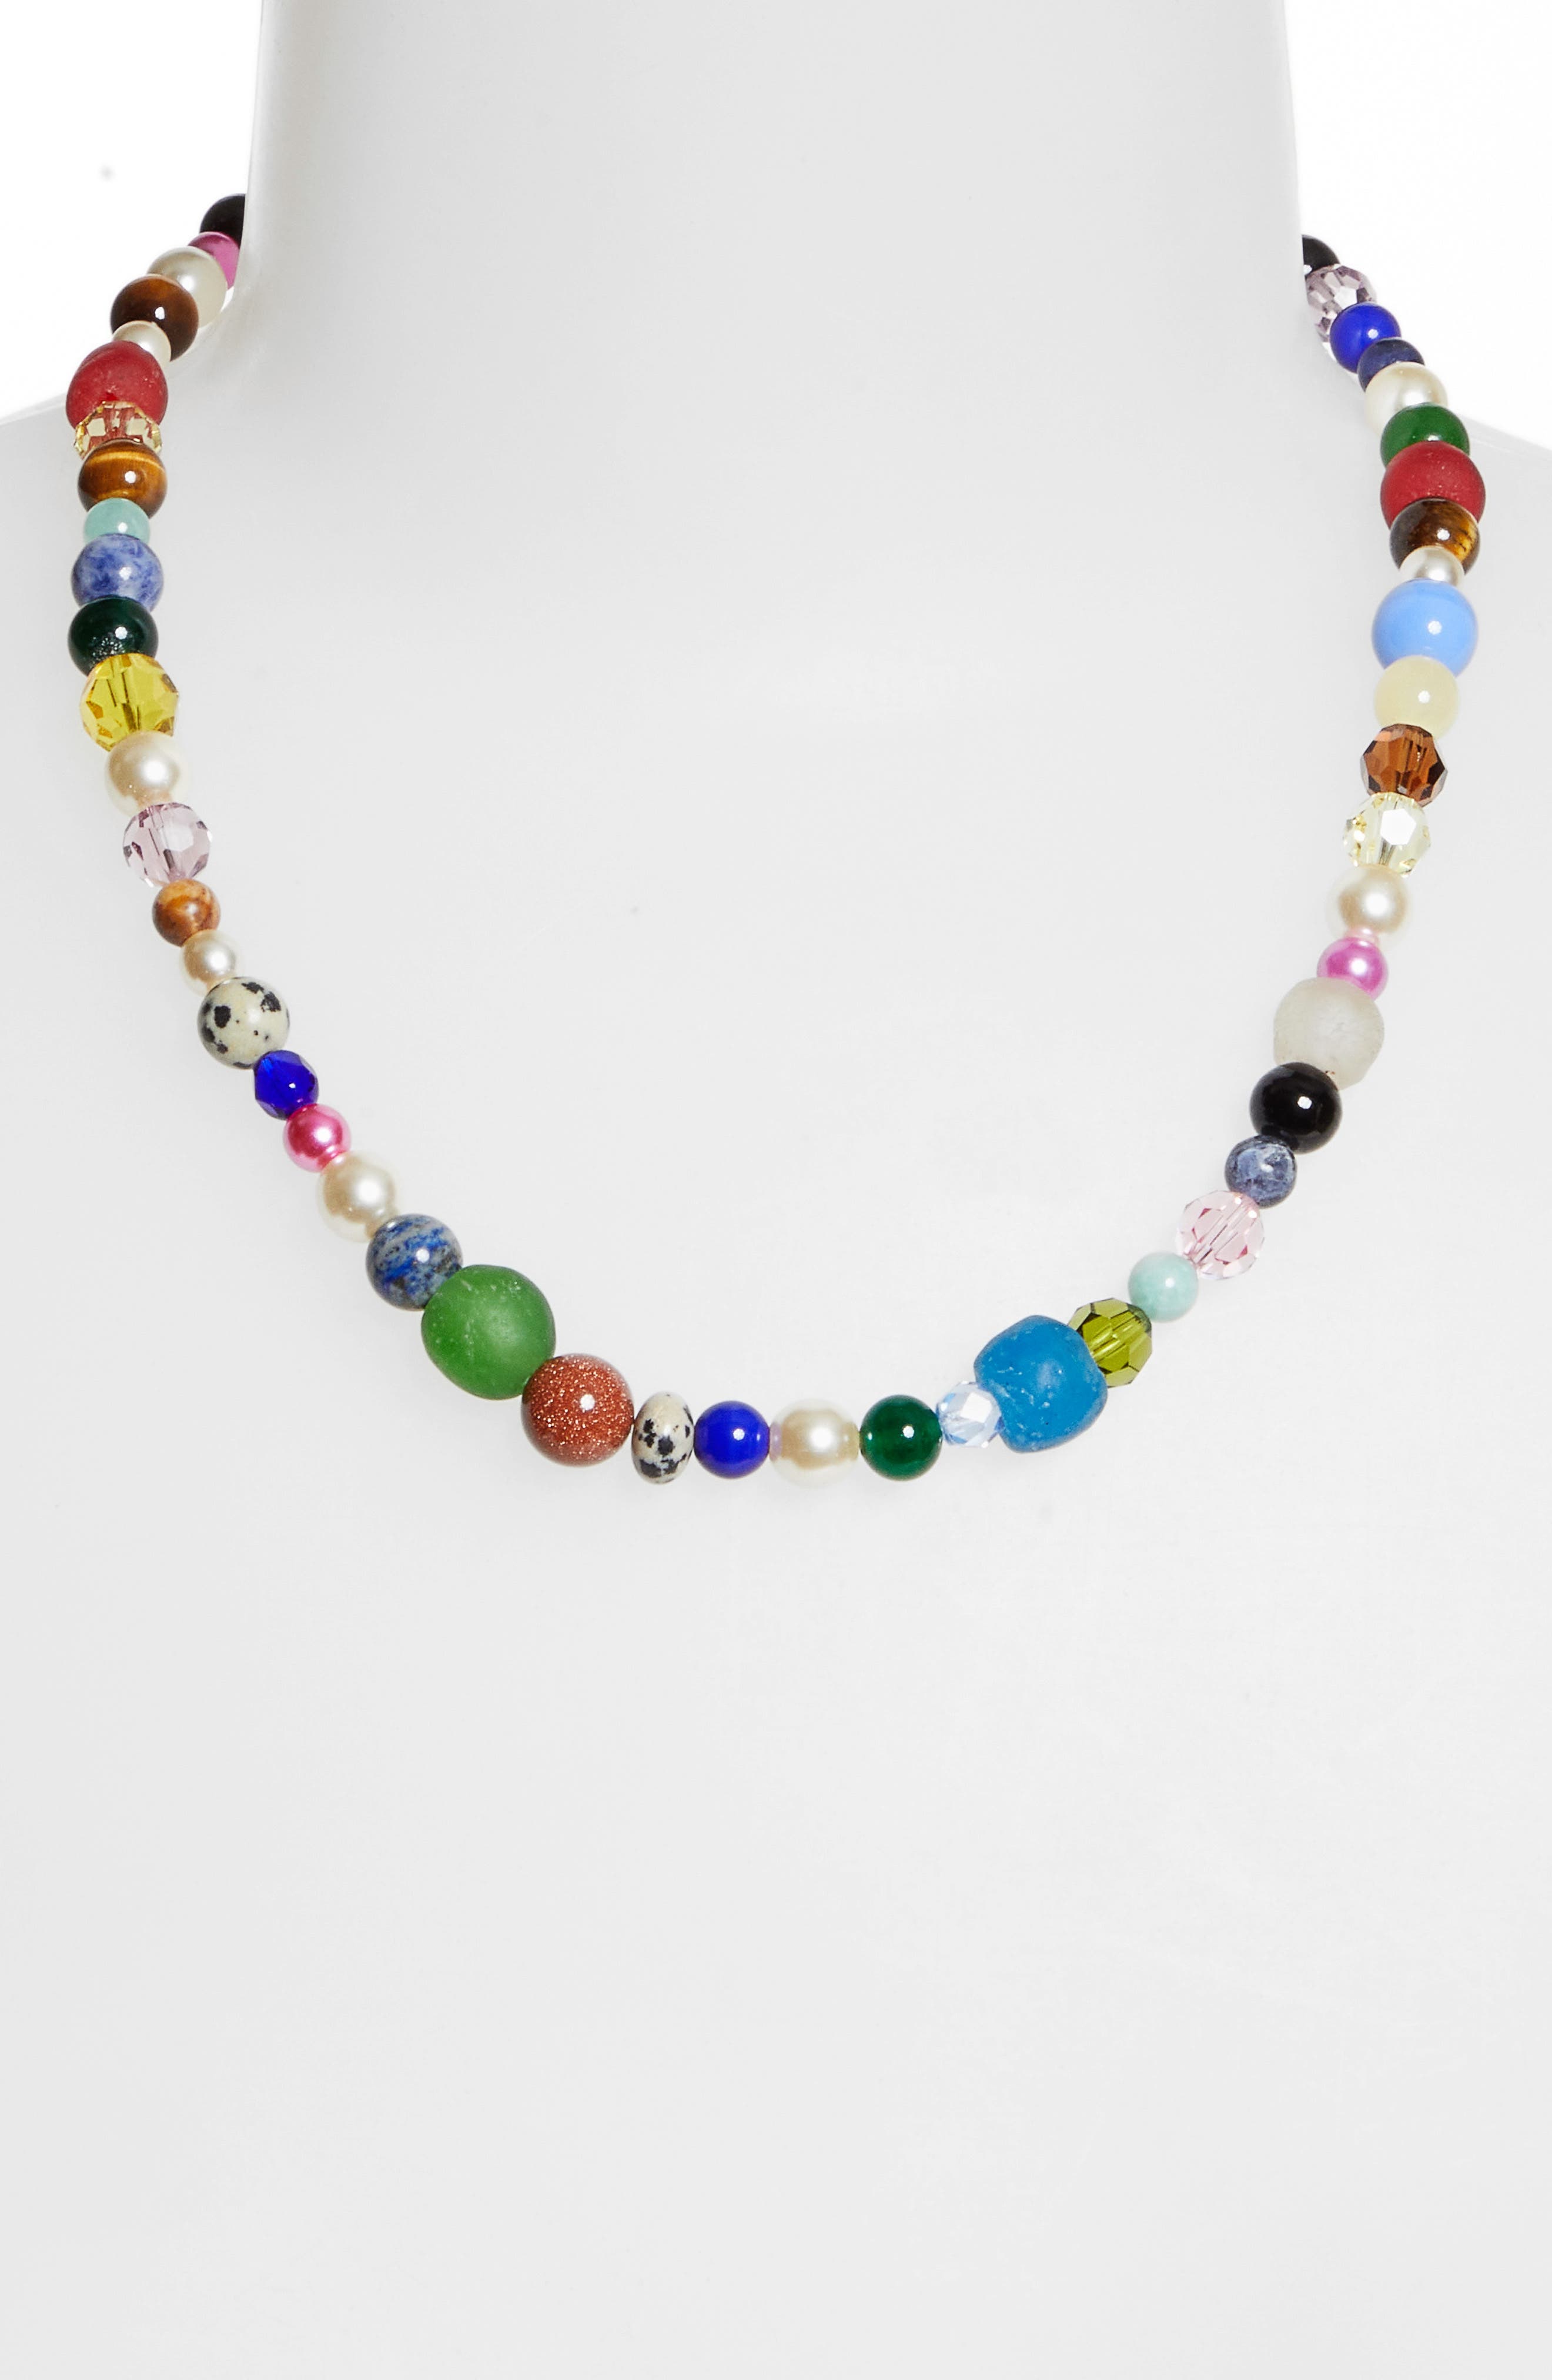 Camiel Fortgens Beaded Stretch Necklace in Blue/Ivory/Red Multi